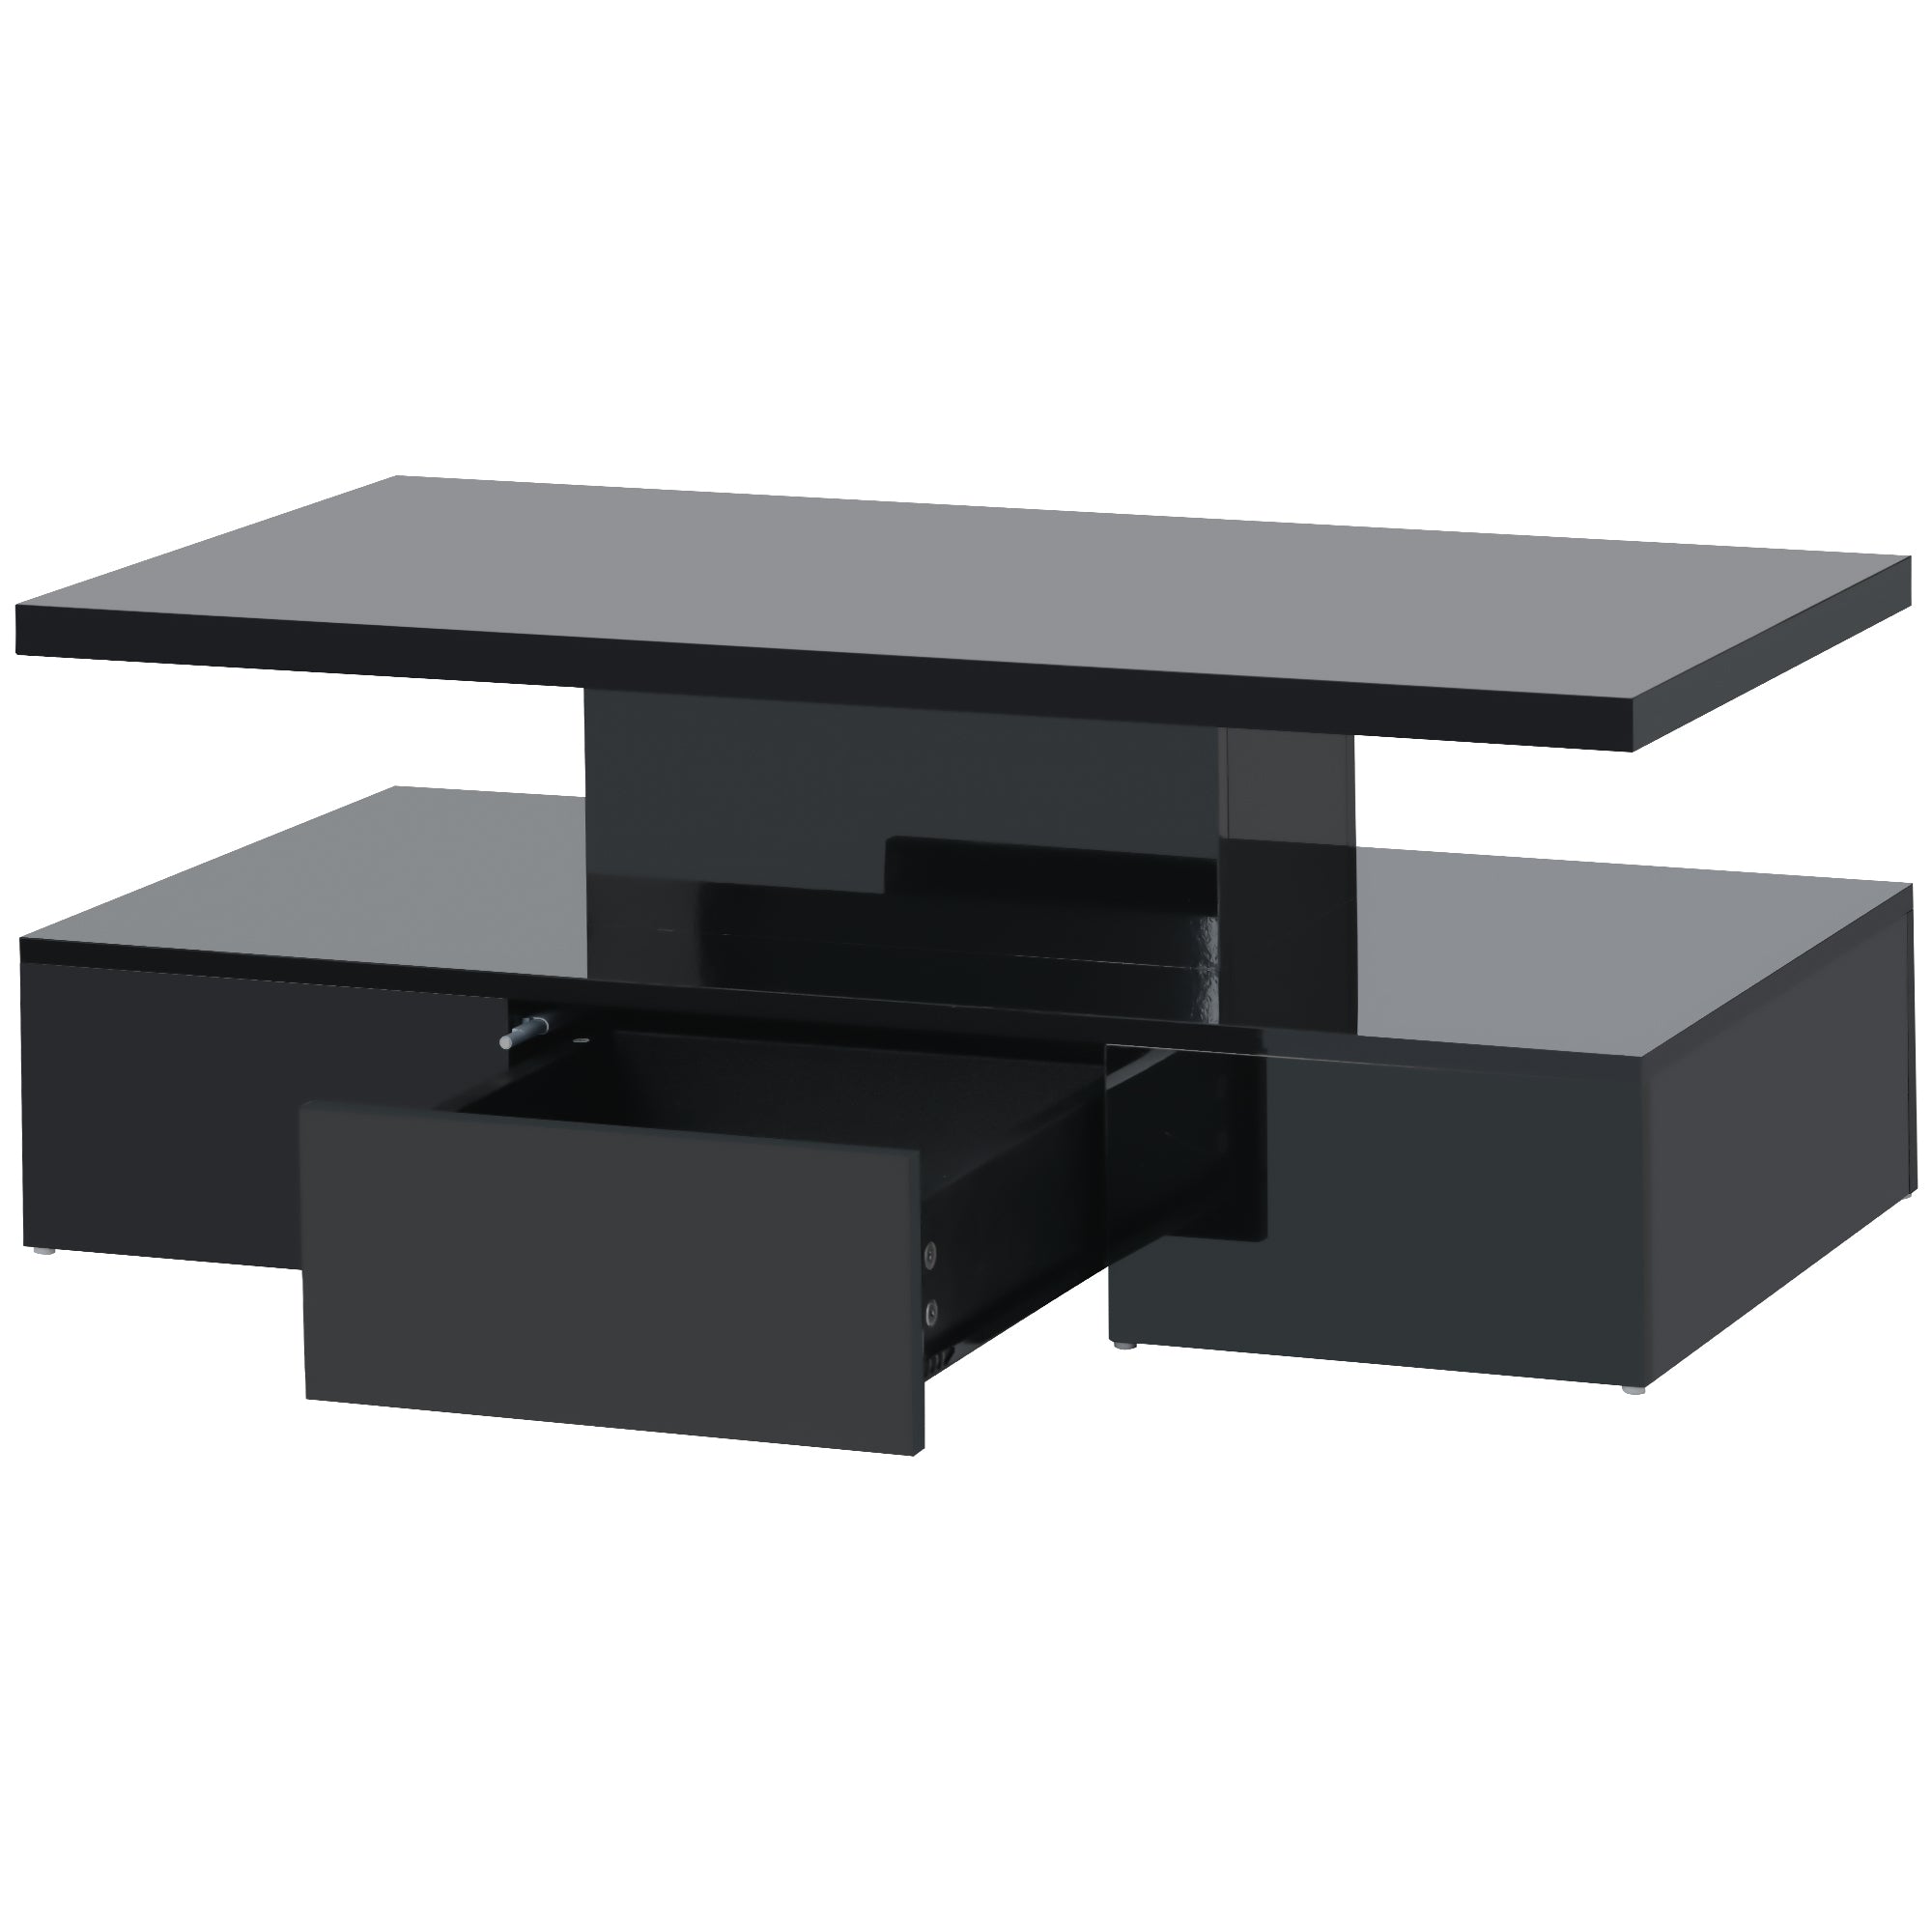 ON TREND Modern Glossy Coffee Table With Drawer, 2 black-particle board